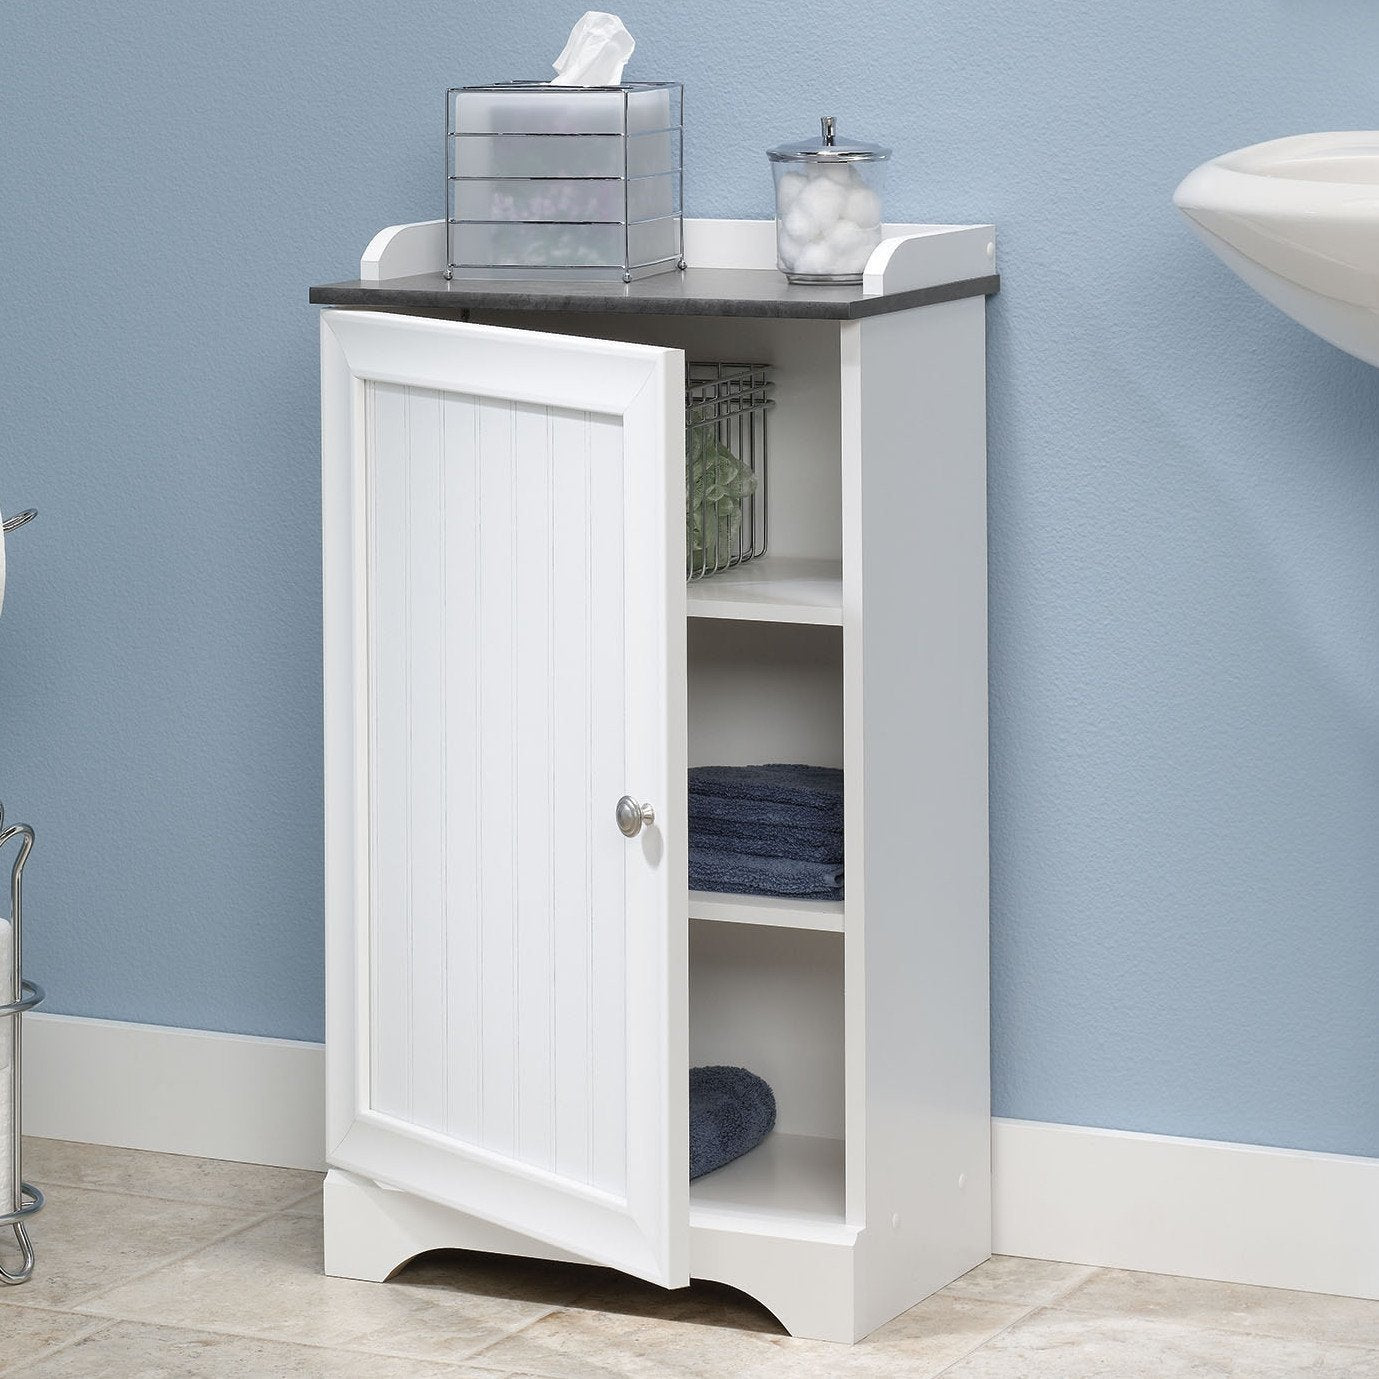 Bathroom Floor Cabinet with Adjustable Shelves in White Finish